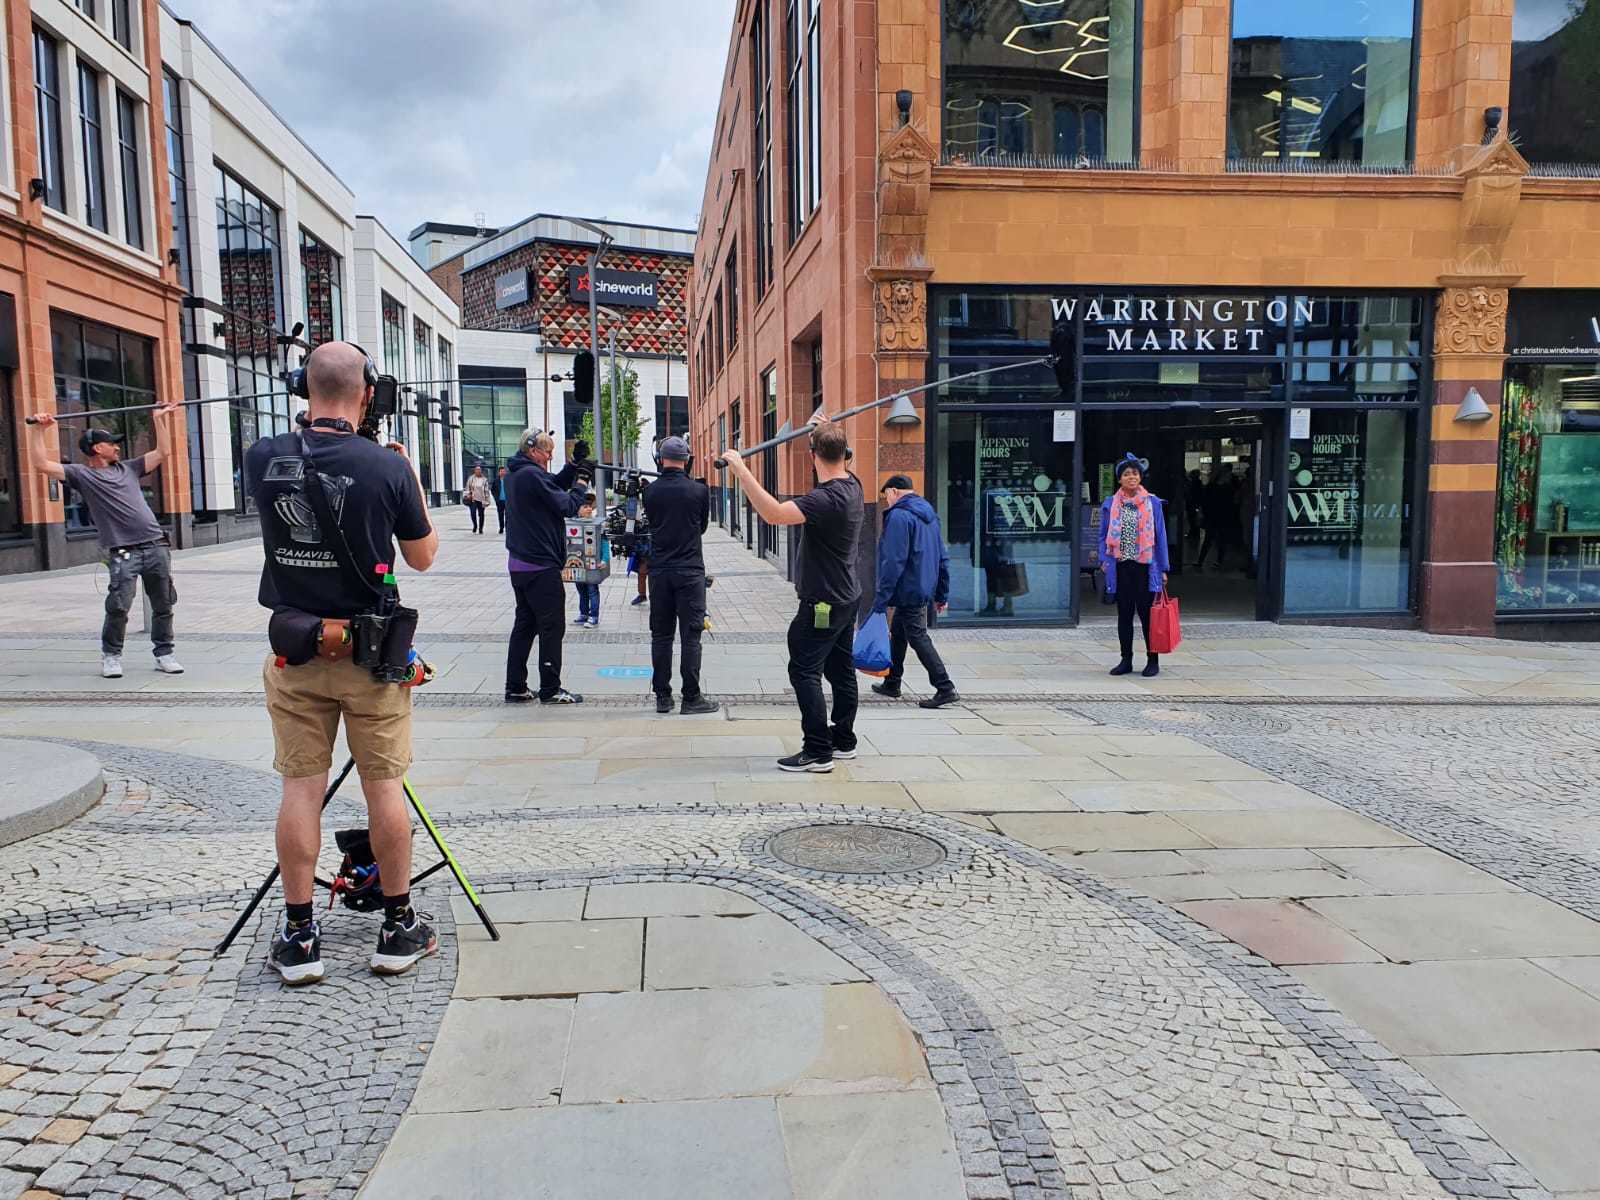 The programme was also filming by Old Market Place